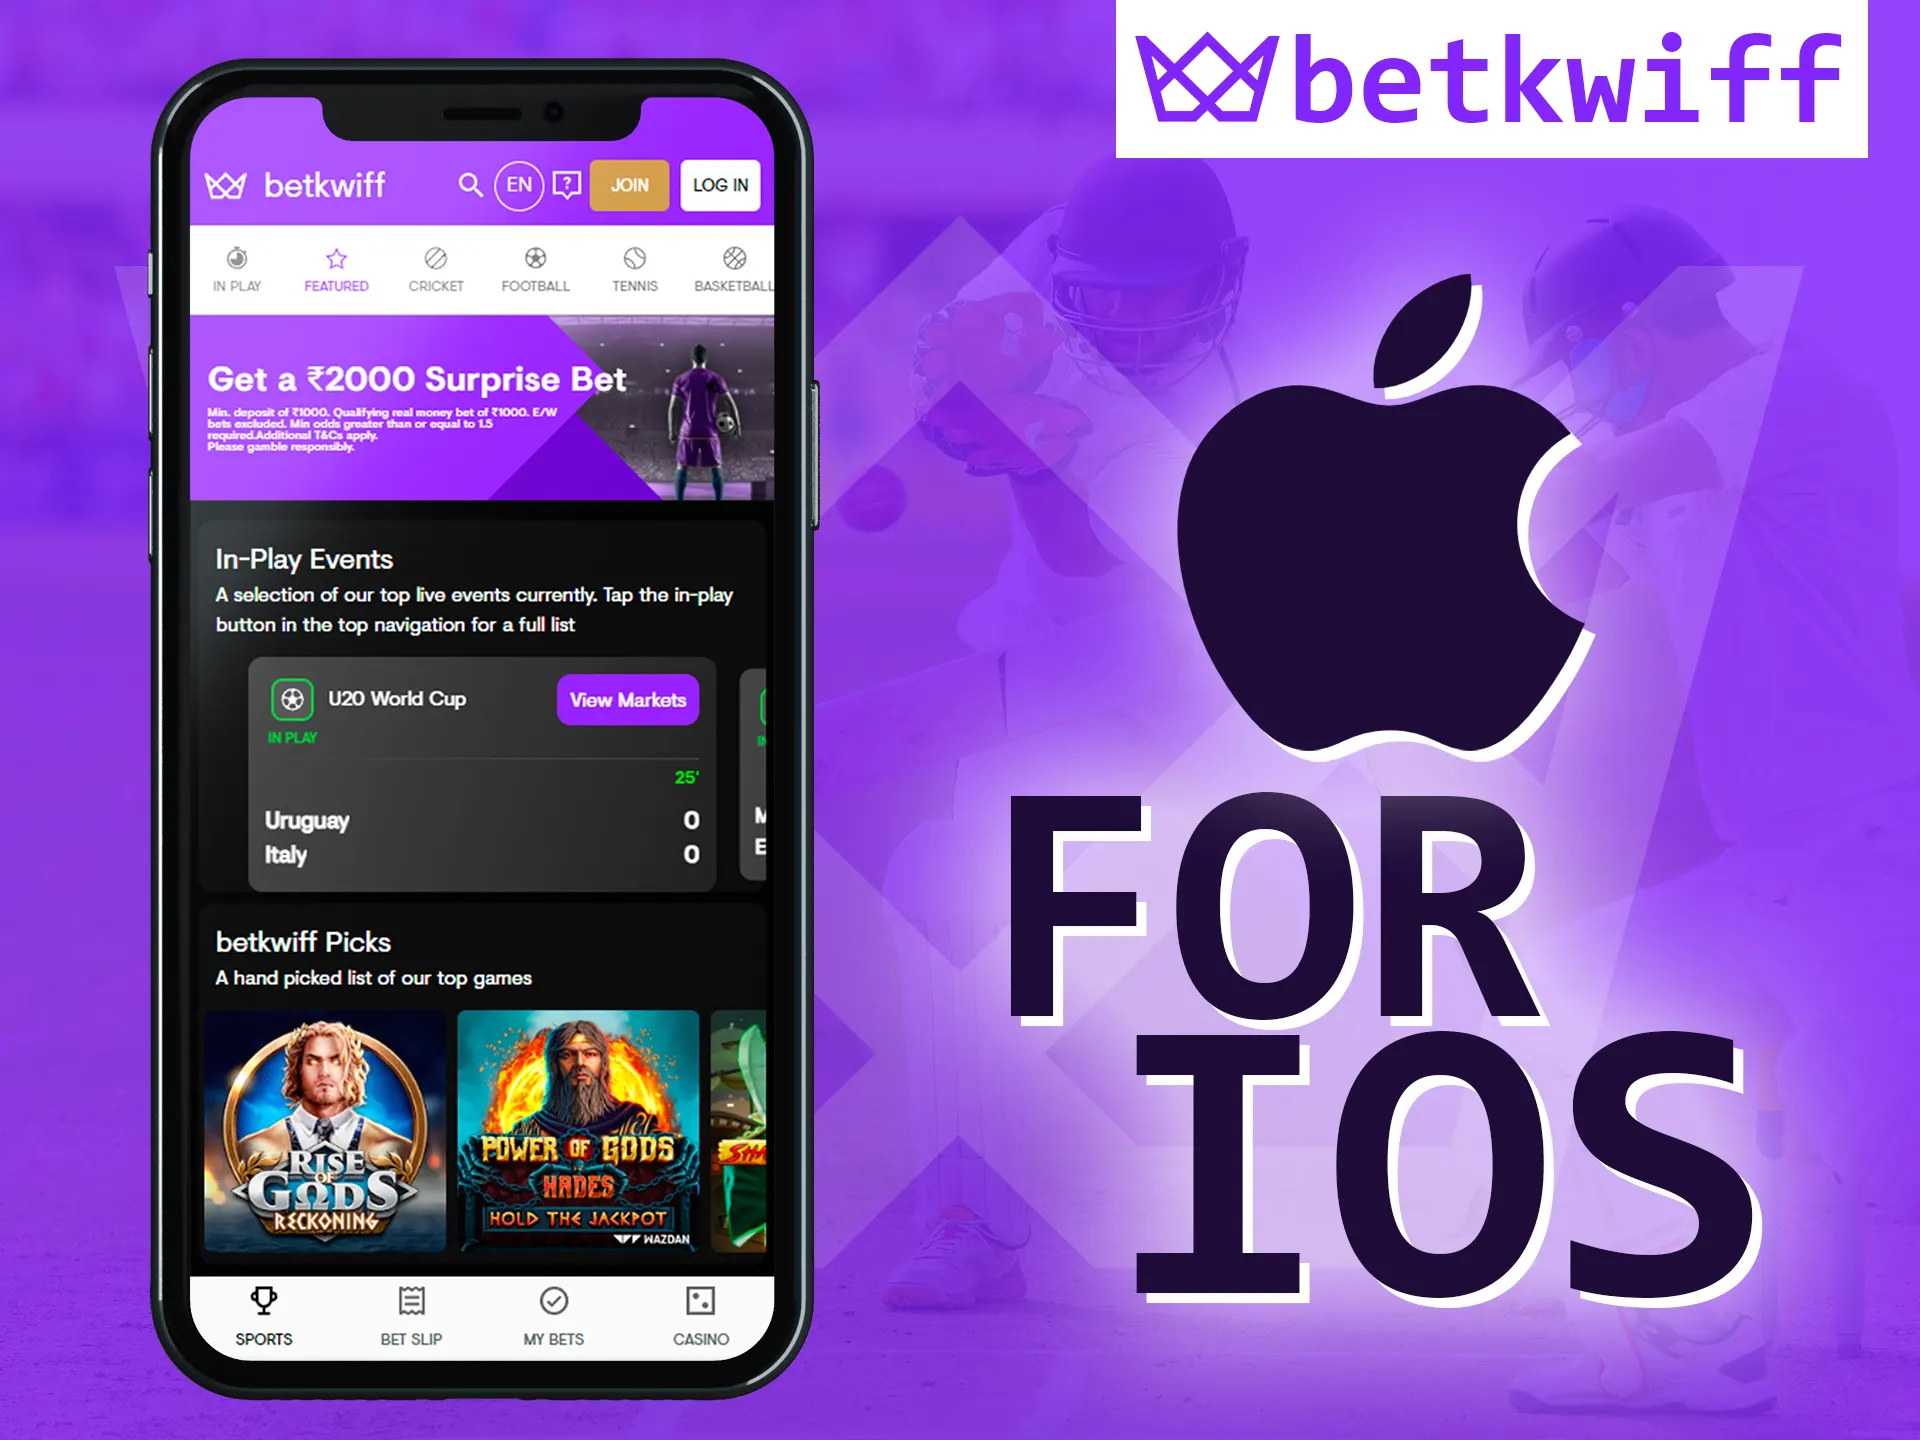 Install Betkwiff on your iOS phone.